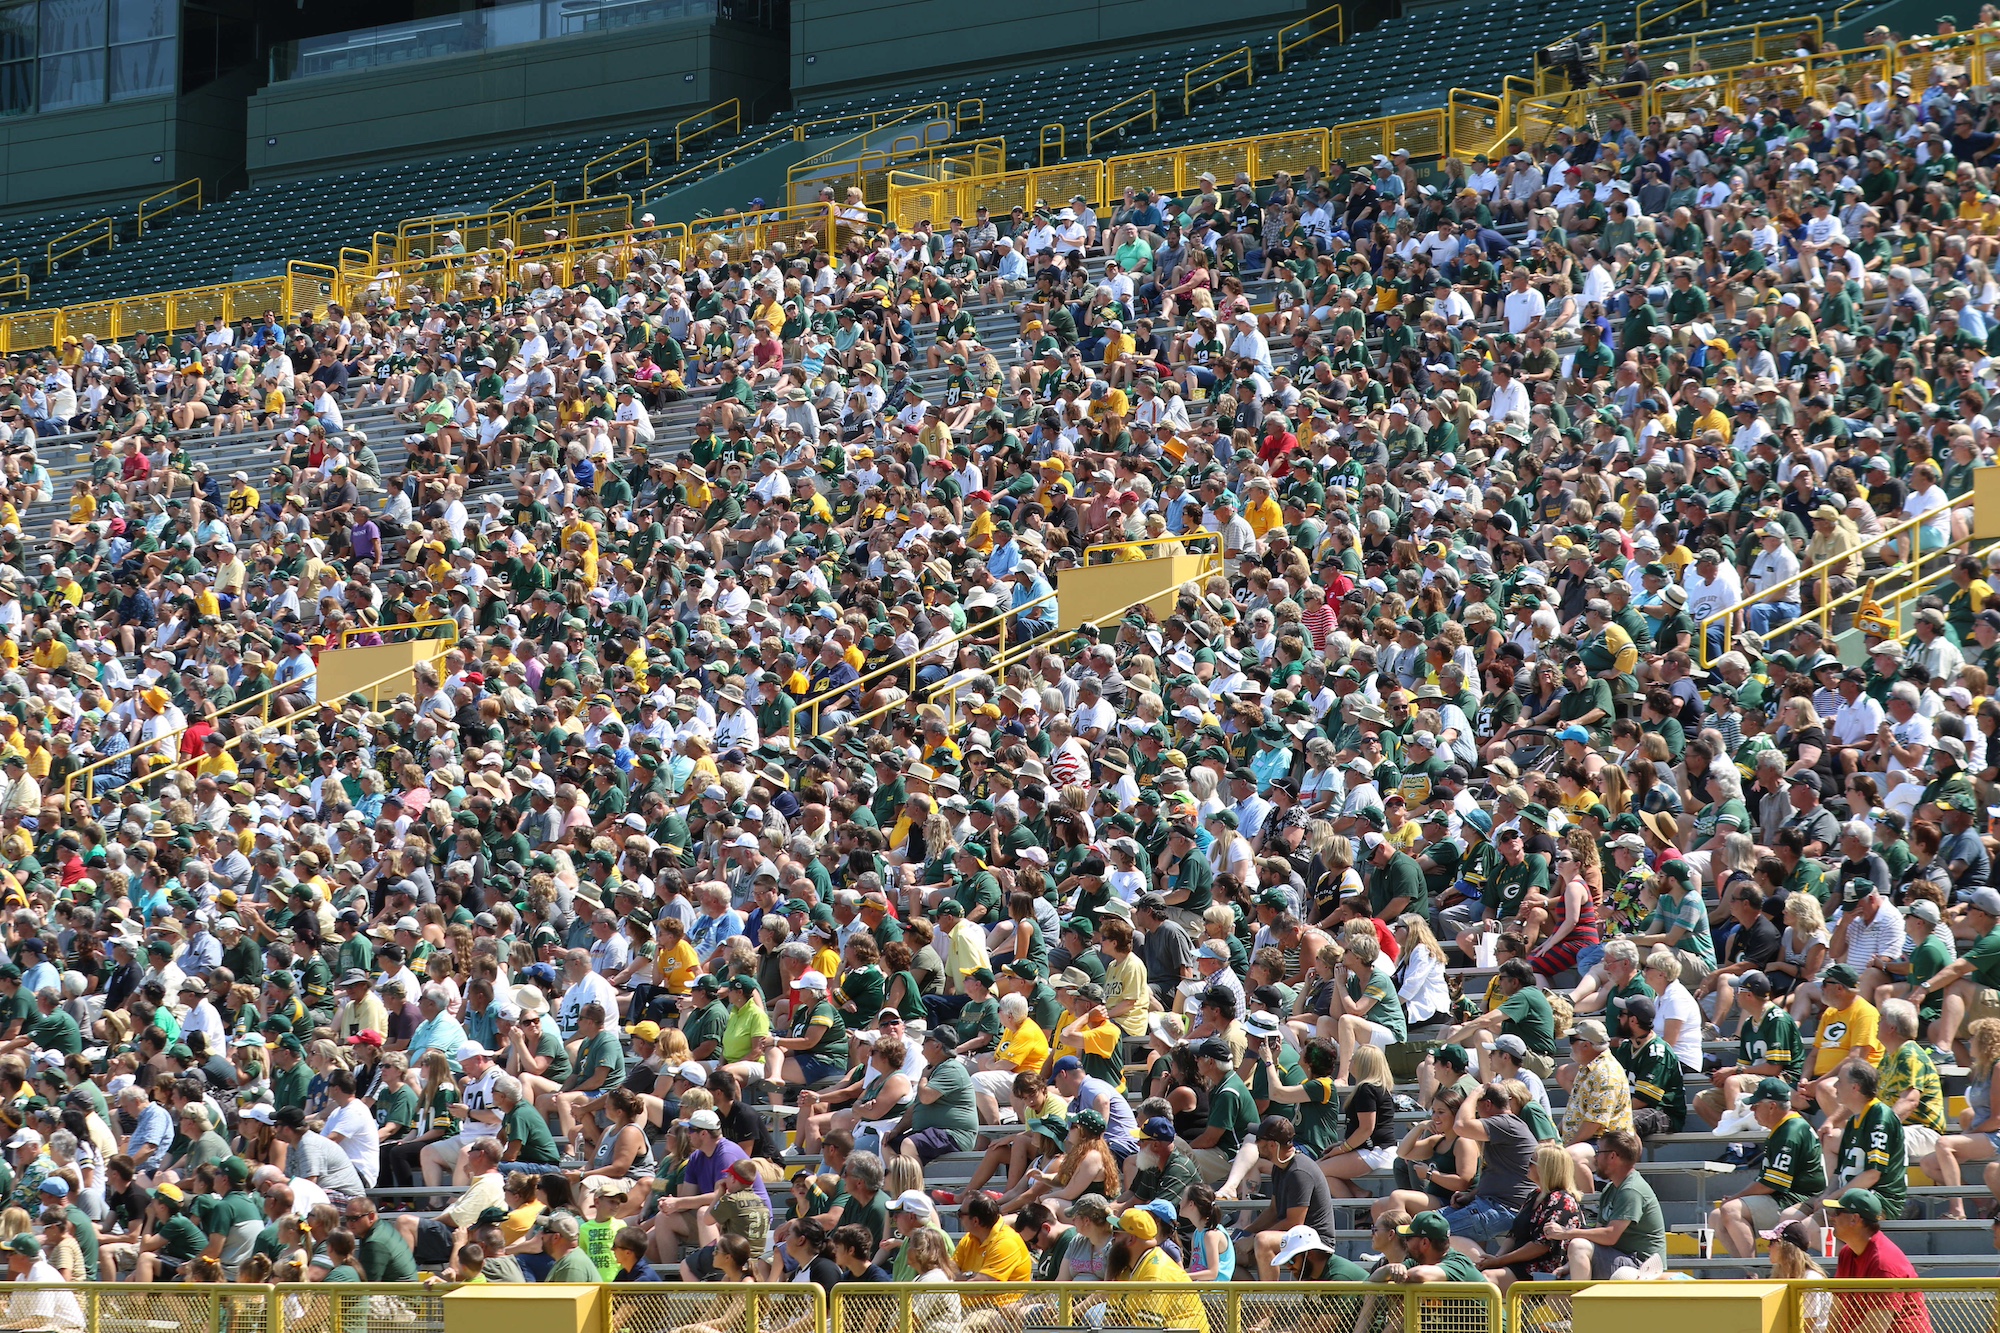 GREEN BAY, WI - JULY 24: Green Bay Packers shareholders fill Lambeau Field for the Green Bay Packers Shareholders meeting on July 24, 2019 at Lambeau Field, in Green Bay, WI. (Photo by Larry Radloff/Icon Sportswire via Getty Images)